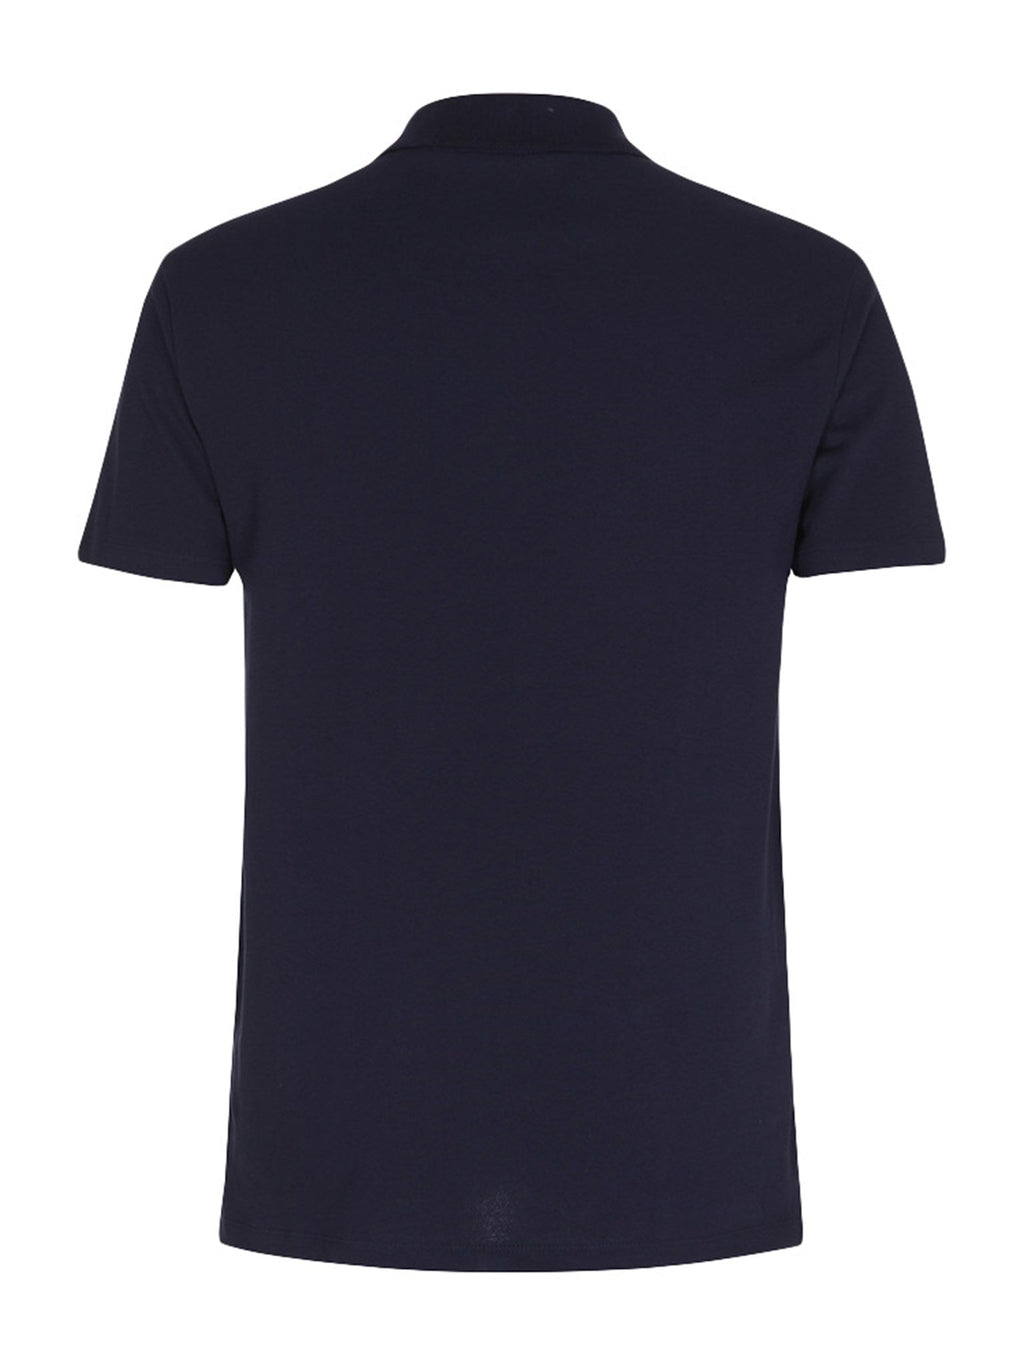 POLO MUSCLE - NAVY